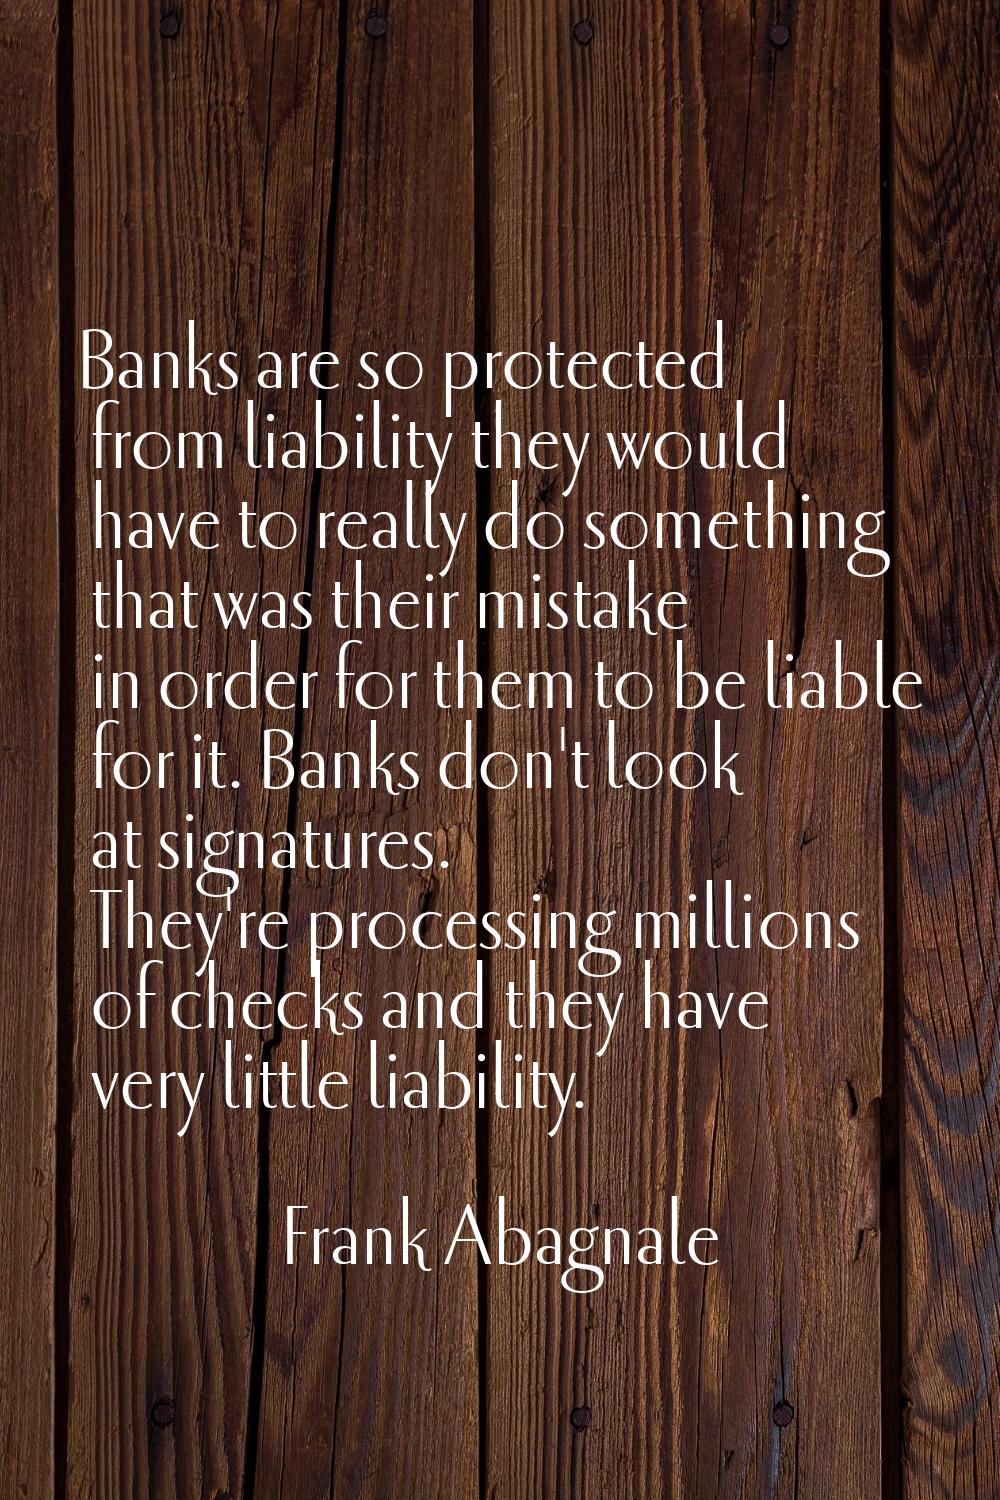 Banks are so protected from liability they would have to really do something that was their mistake